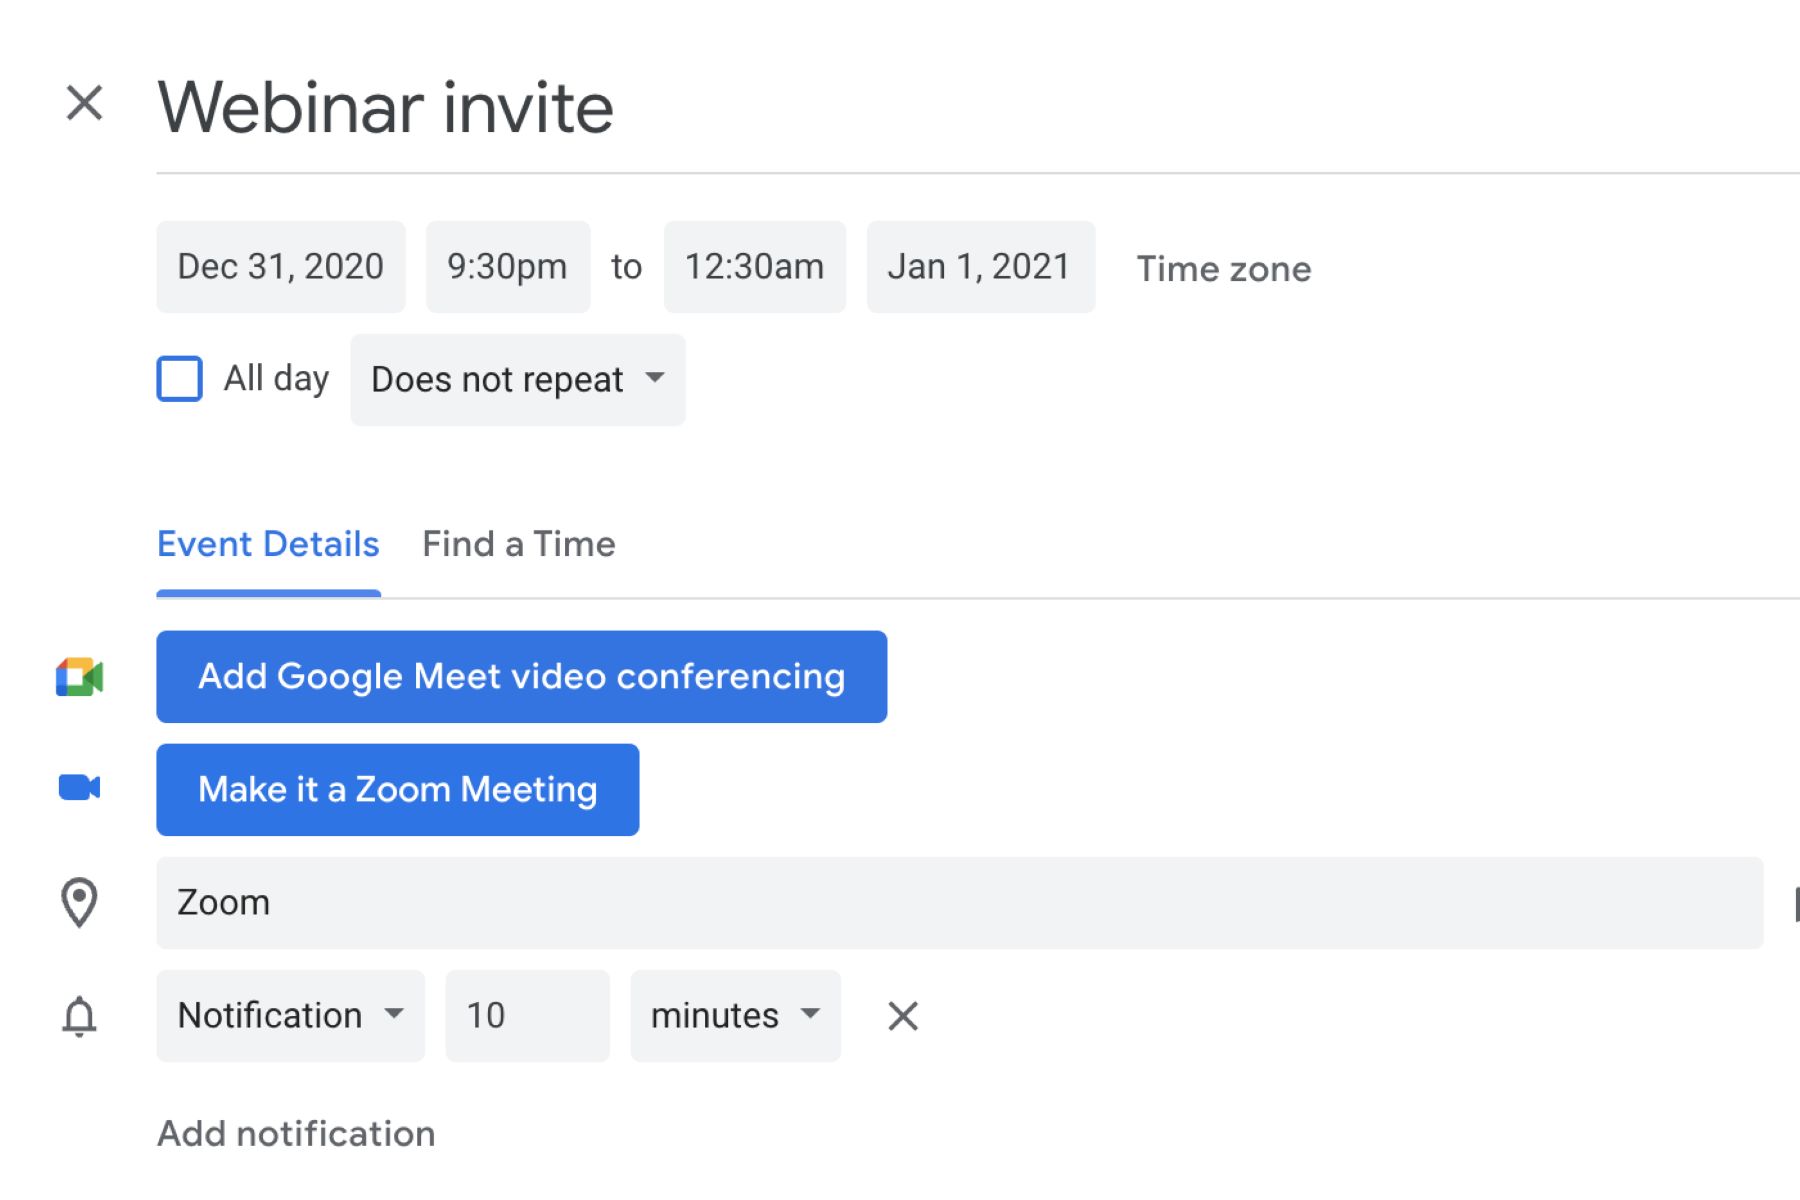 How To Add A Zoom Link To A Google Calendar Invite